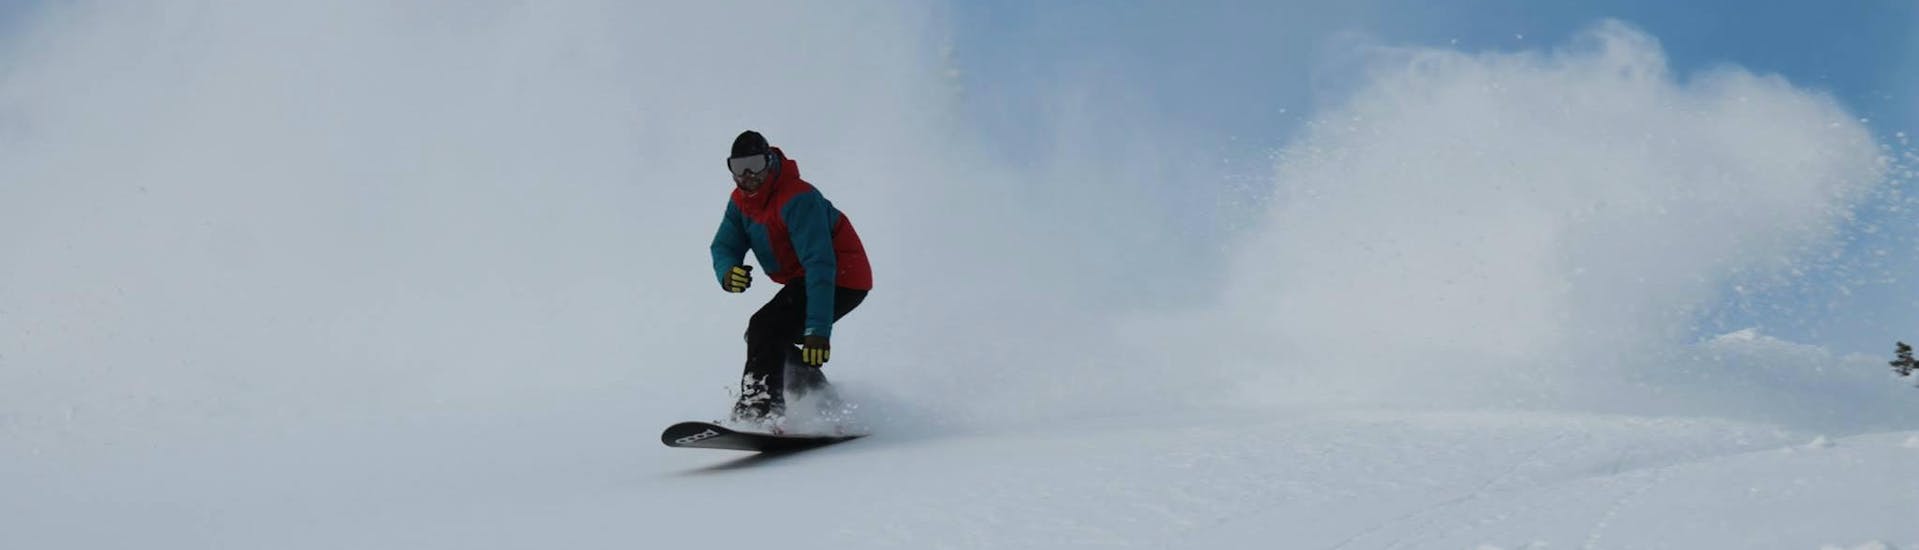 A snowboarder during Private Off-Piste Snowboarding Lessons for All Levels with Boardstars Schladming.